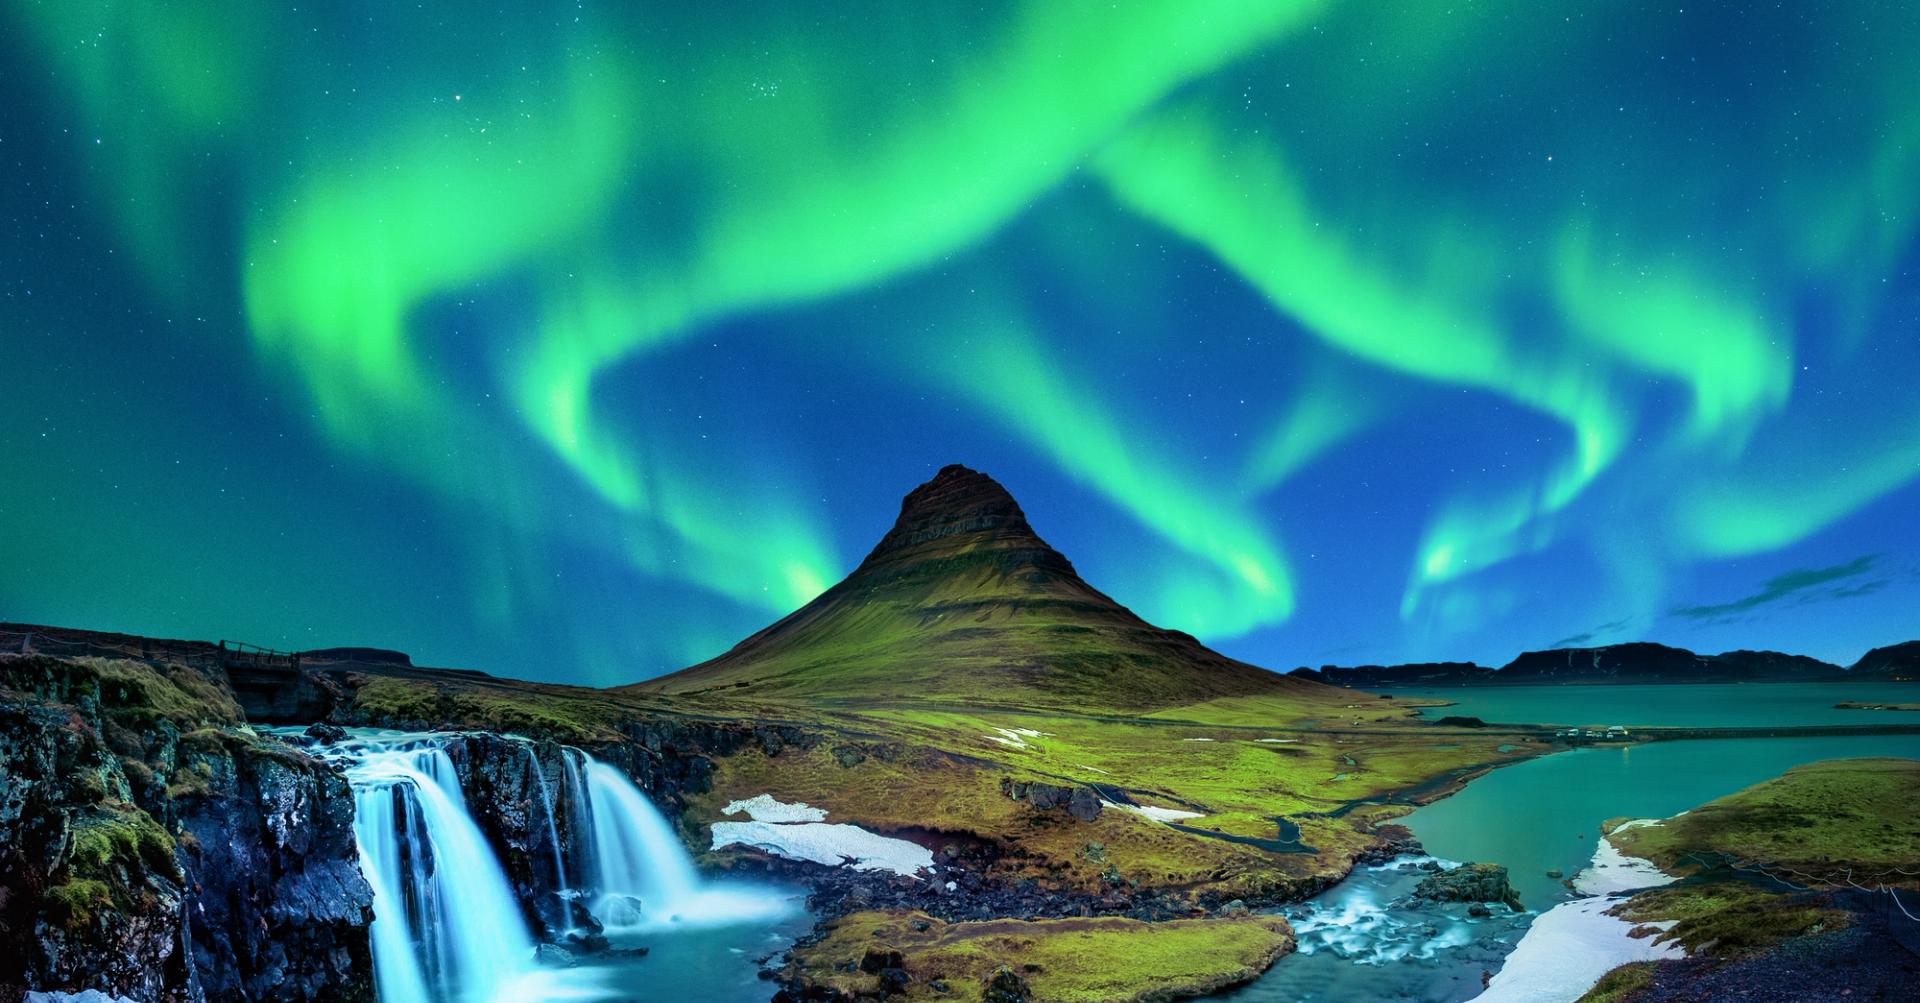 A collage of Iceland's most captivating photography locations, featuring waterfalls, mountains, glaciers, and the Northern Lights